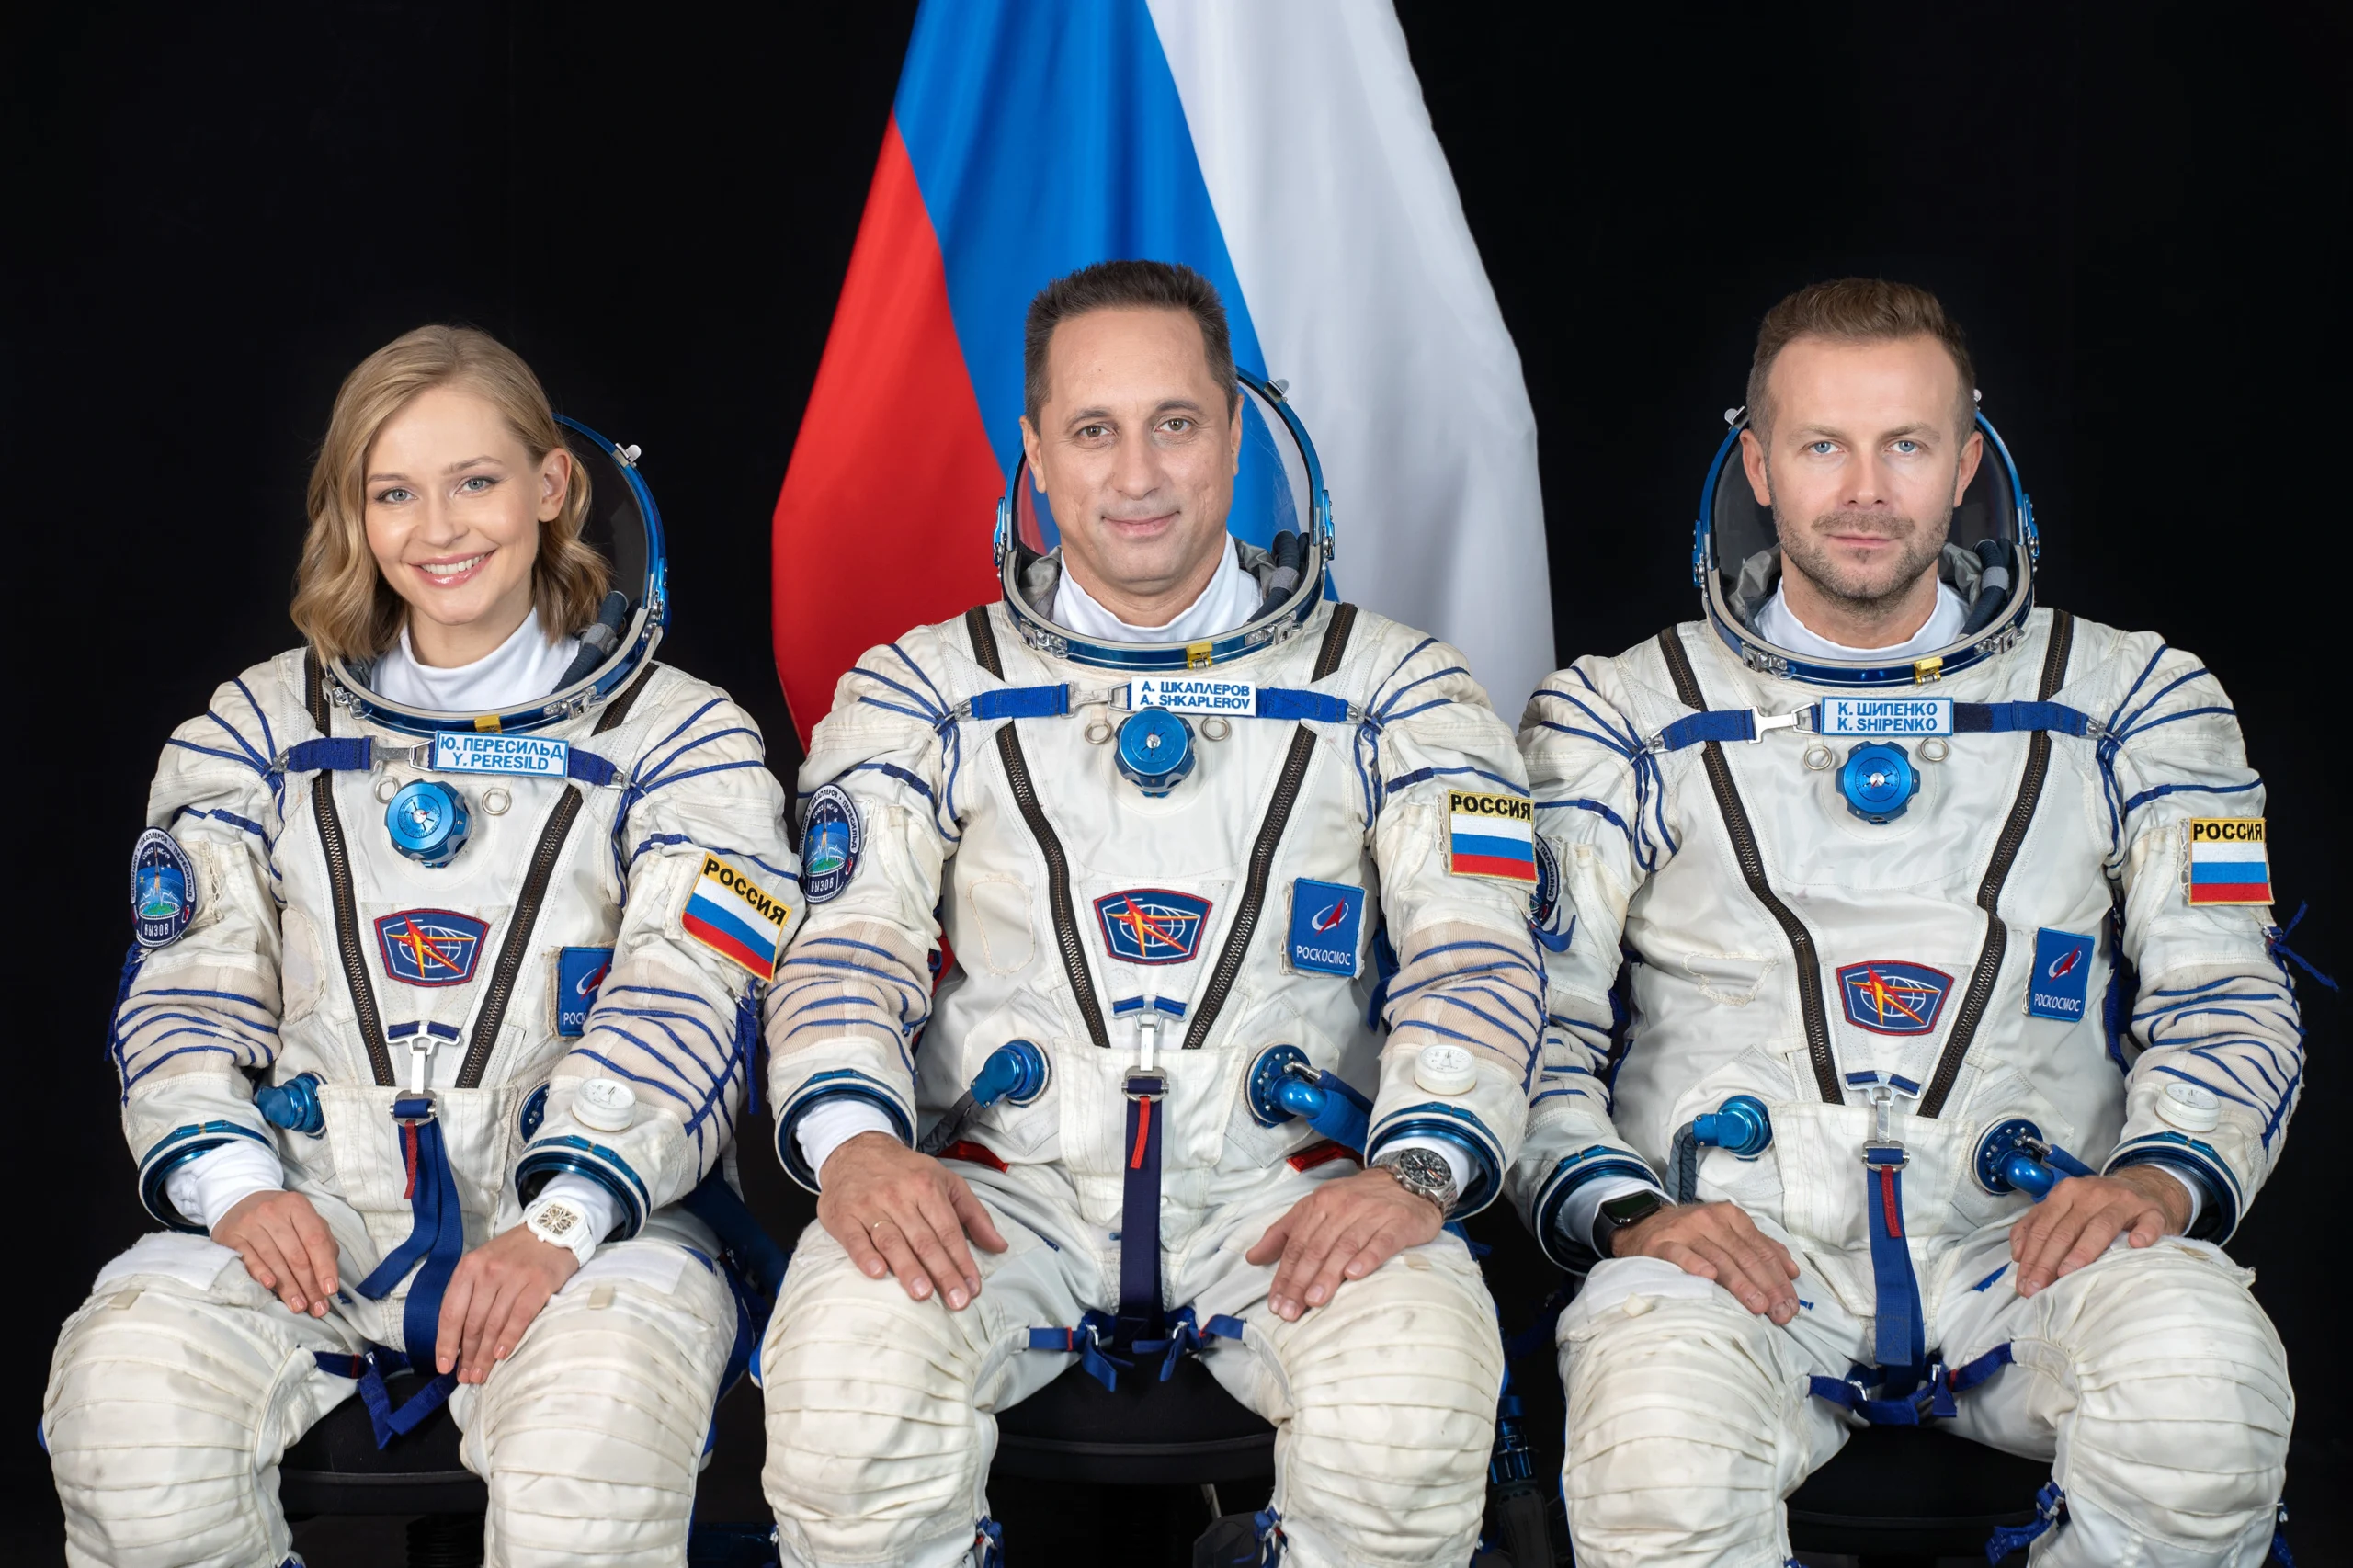 Trailer for Russian Film 'The Challenge' Shot for Real in Space